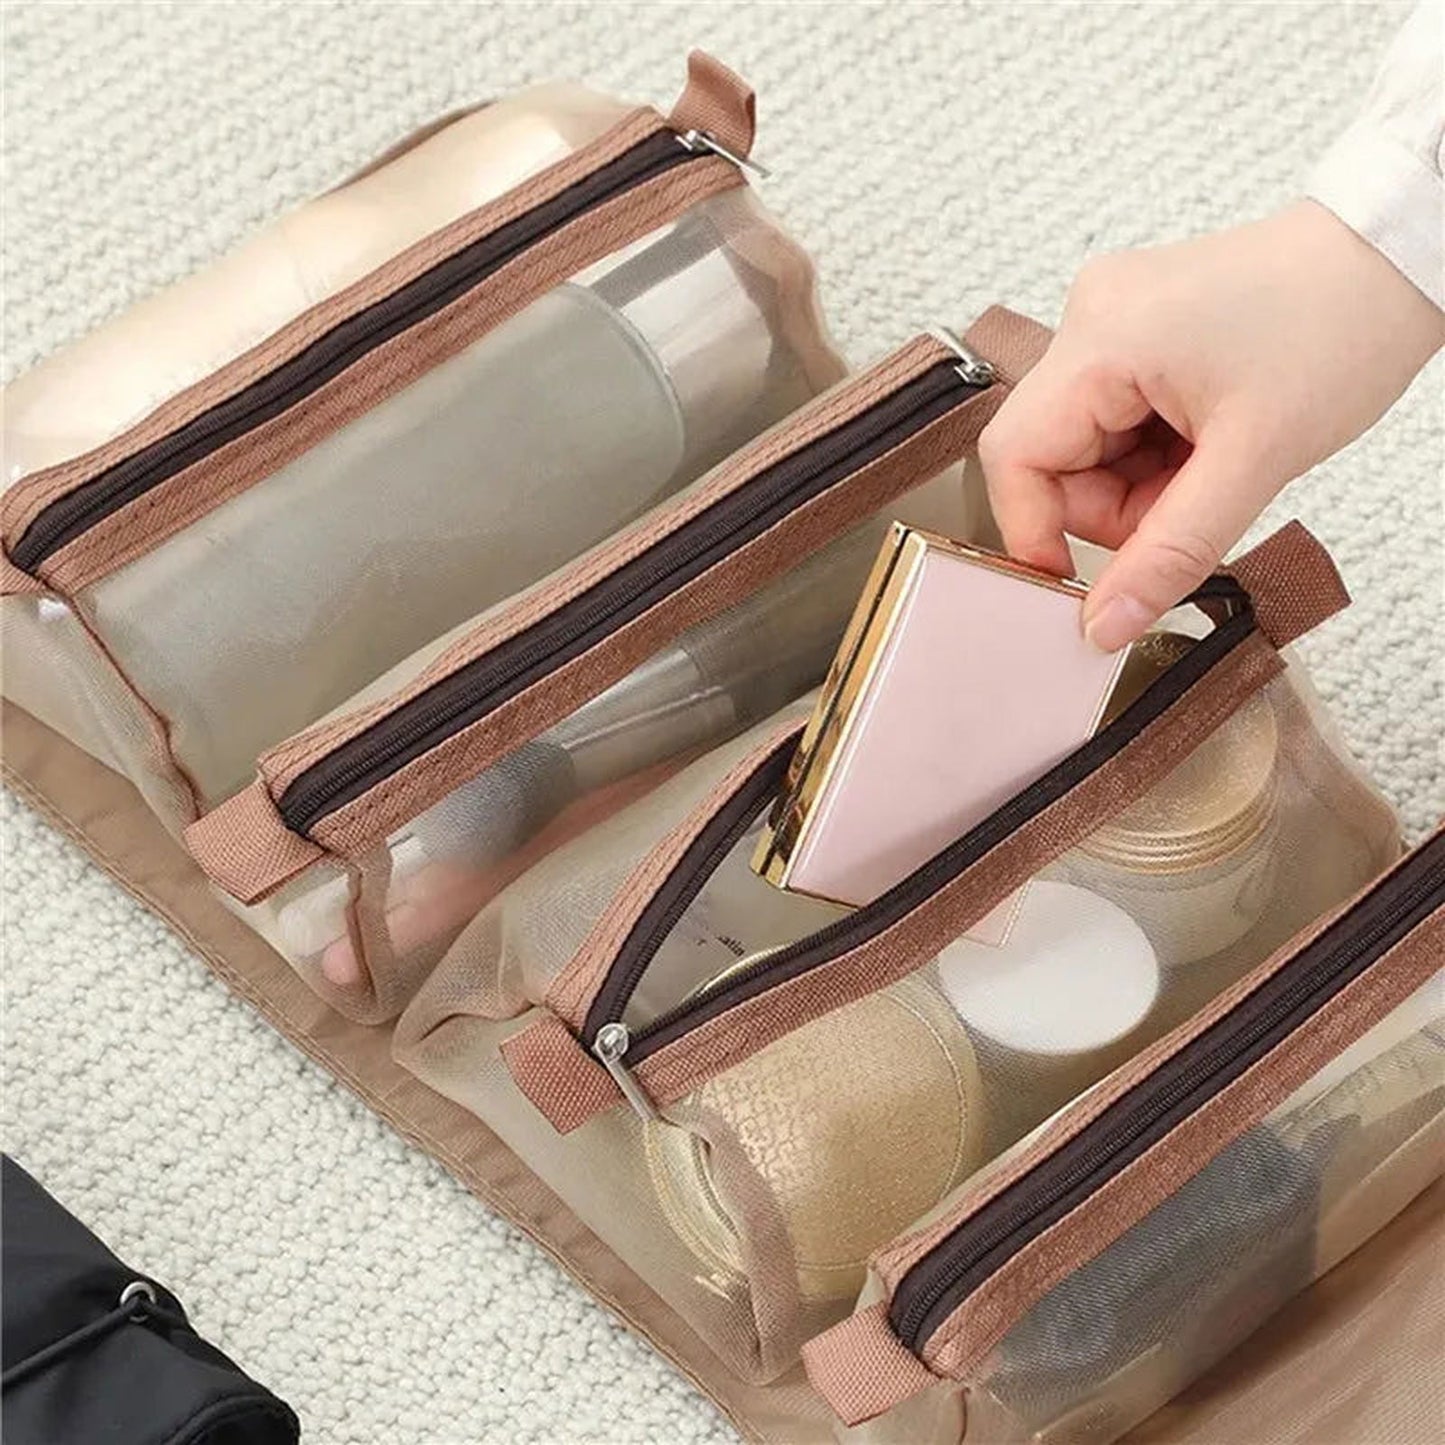 4 in 1 Makeup Bags Portable Folding Travel Cosmetics Storage Toiletry Bag - ARCHE